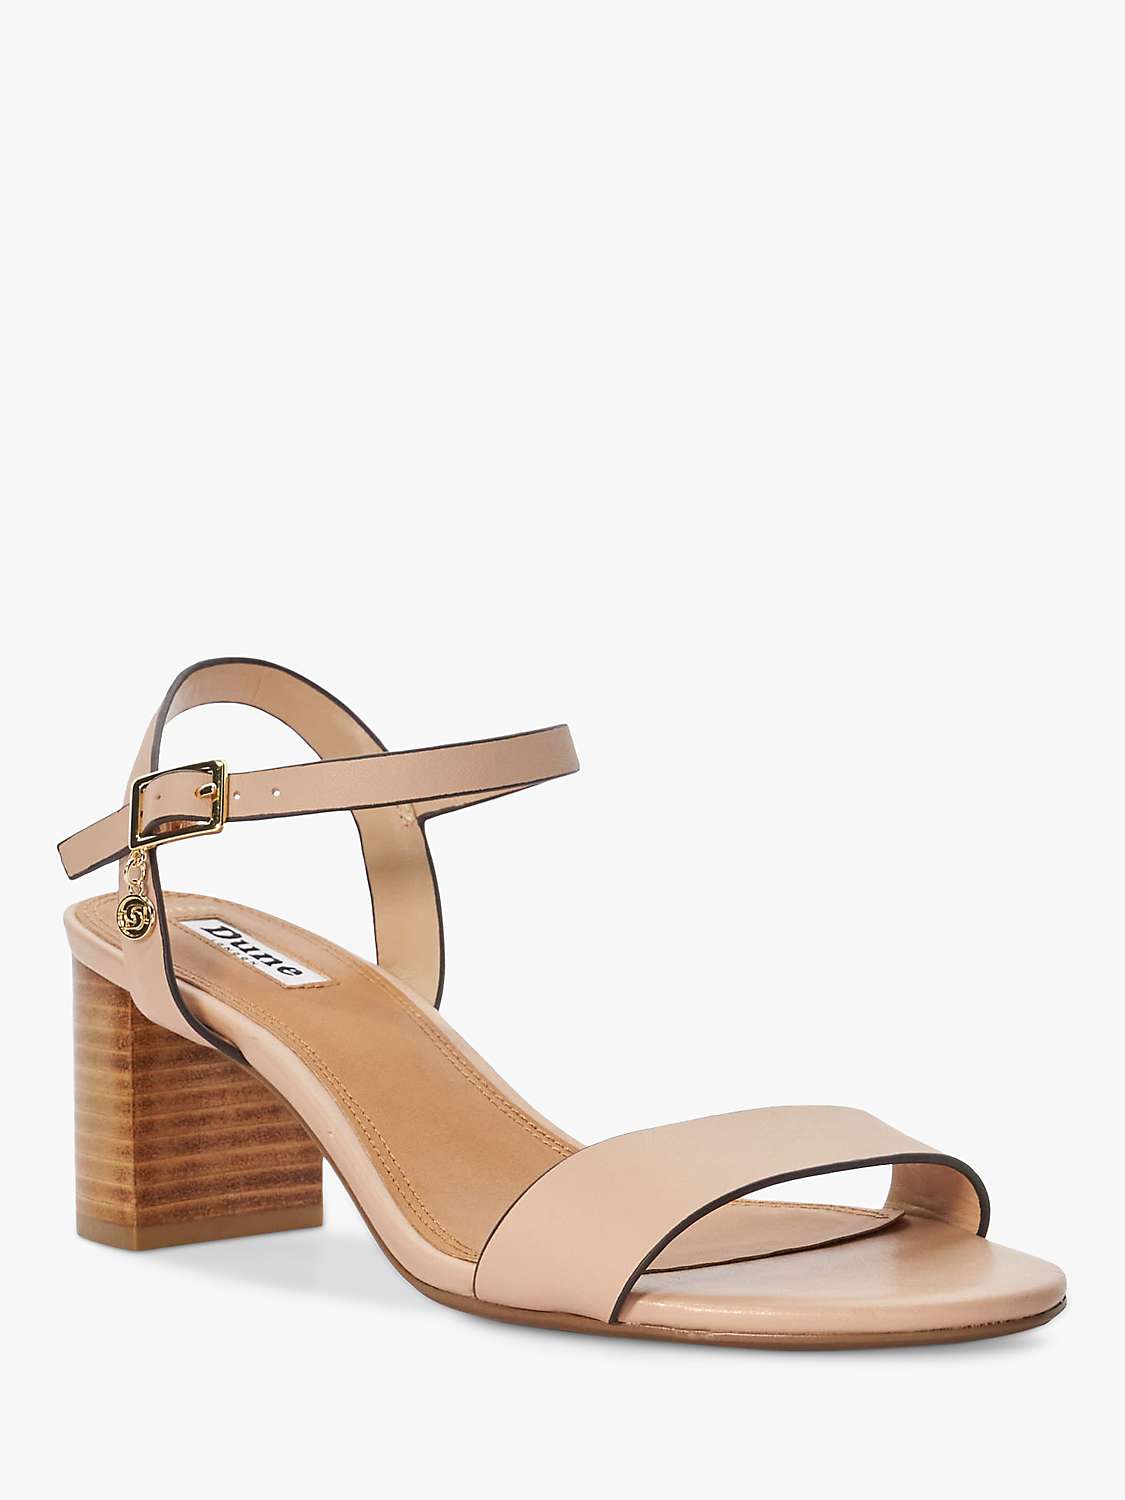 Buy Dune Wide Fit Jelly Leather Block Heel Sandals, Blush Online at johnlewis.com